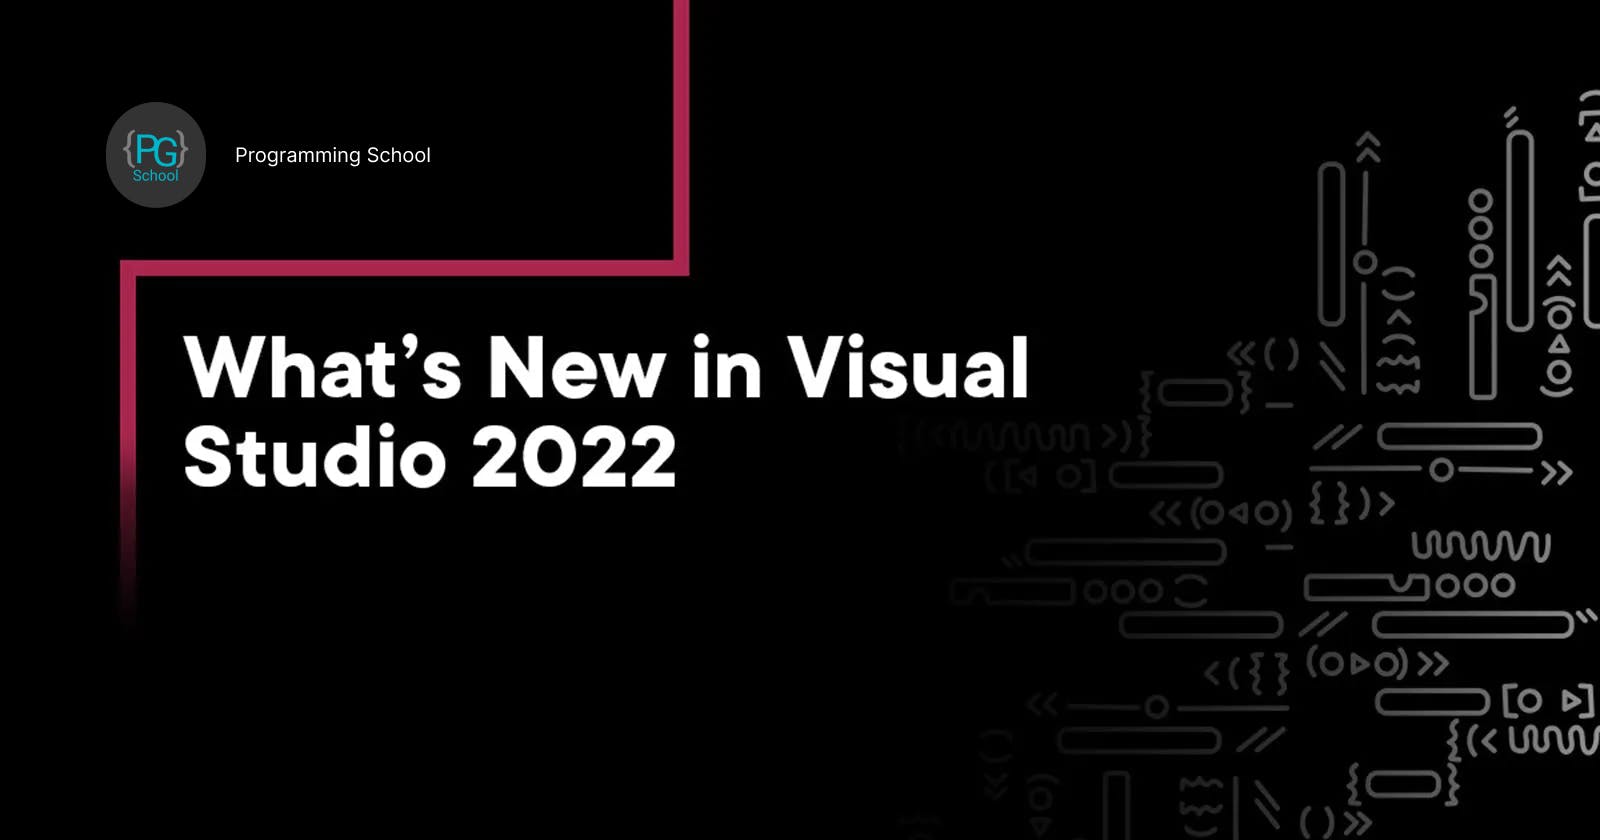 What's New in Visual Studio 2022